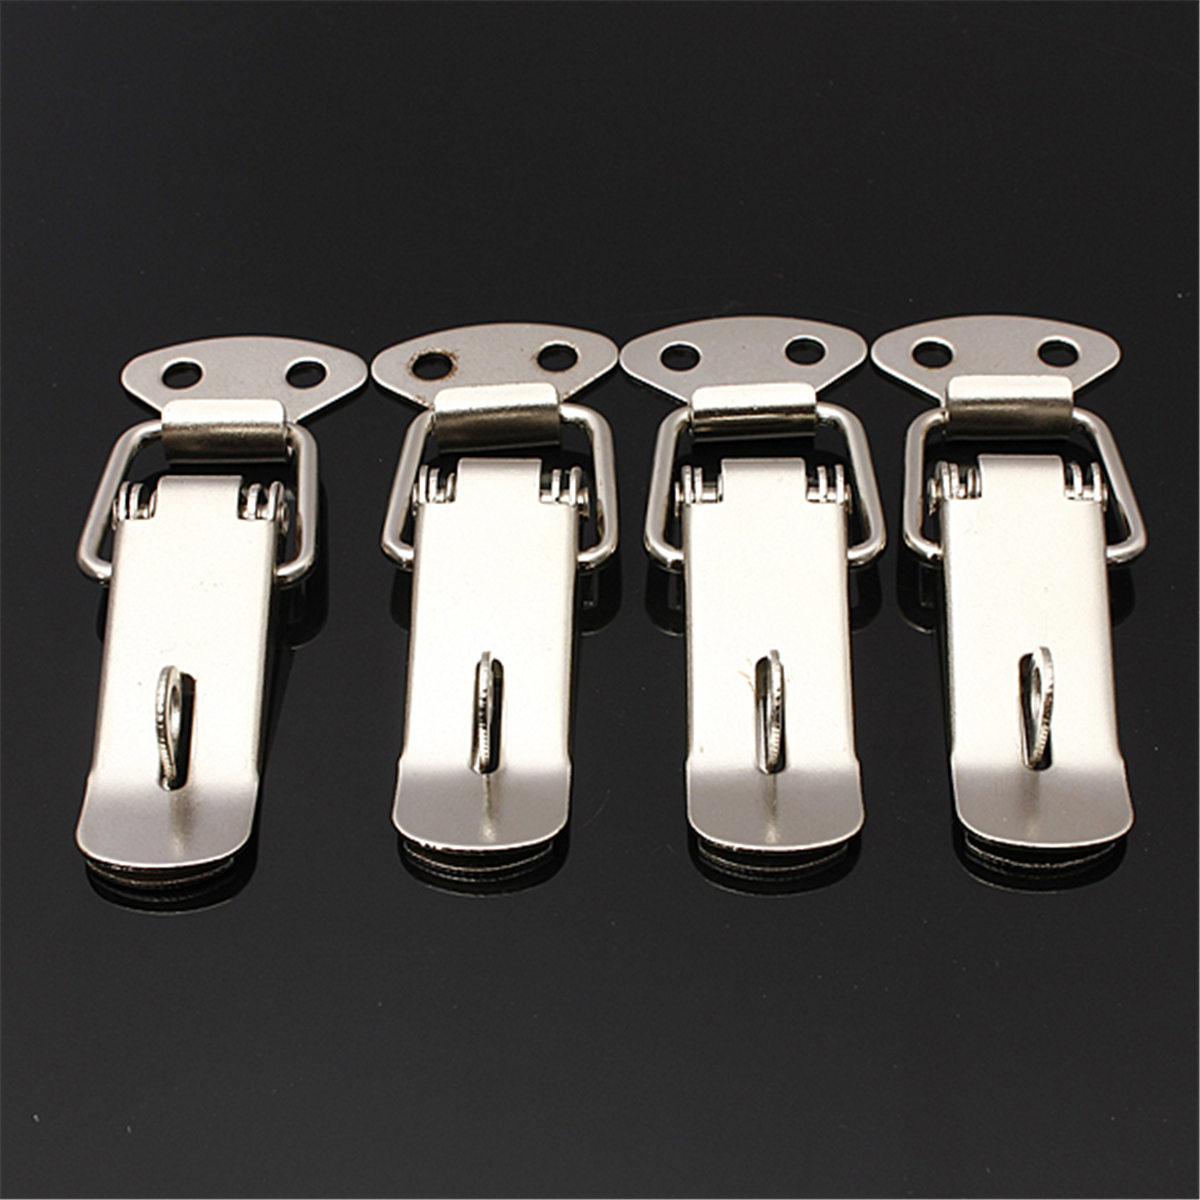 4PCS-Case-Box-Chest-Spring-Stainless-Tone-Lock-Toggle-Latch-Catch-Clasp-948011-5